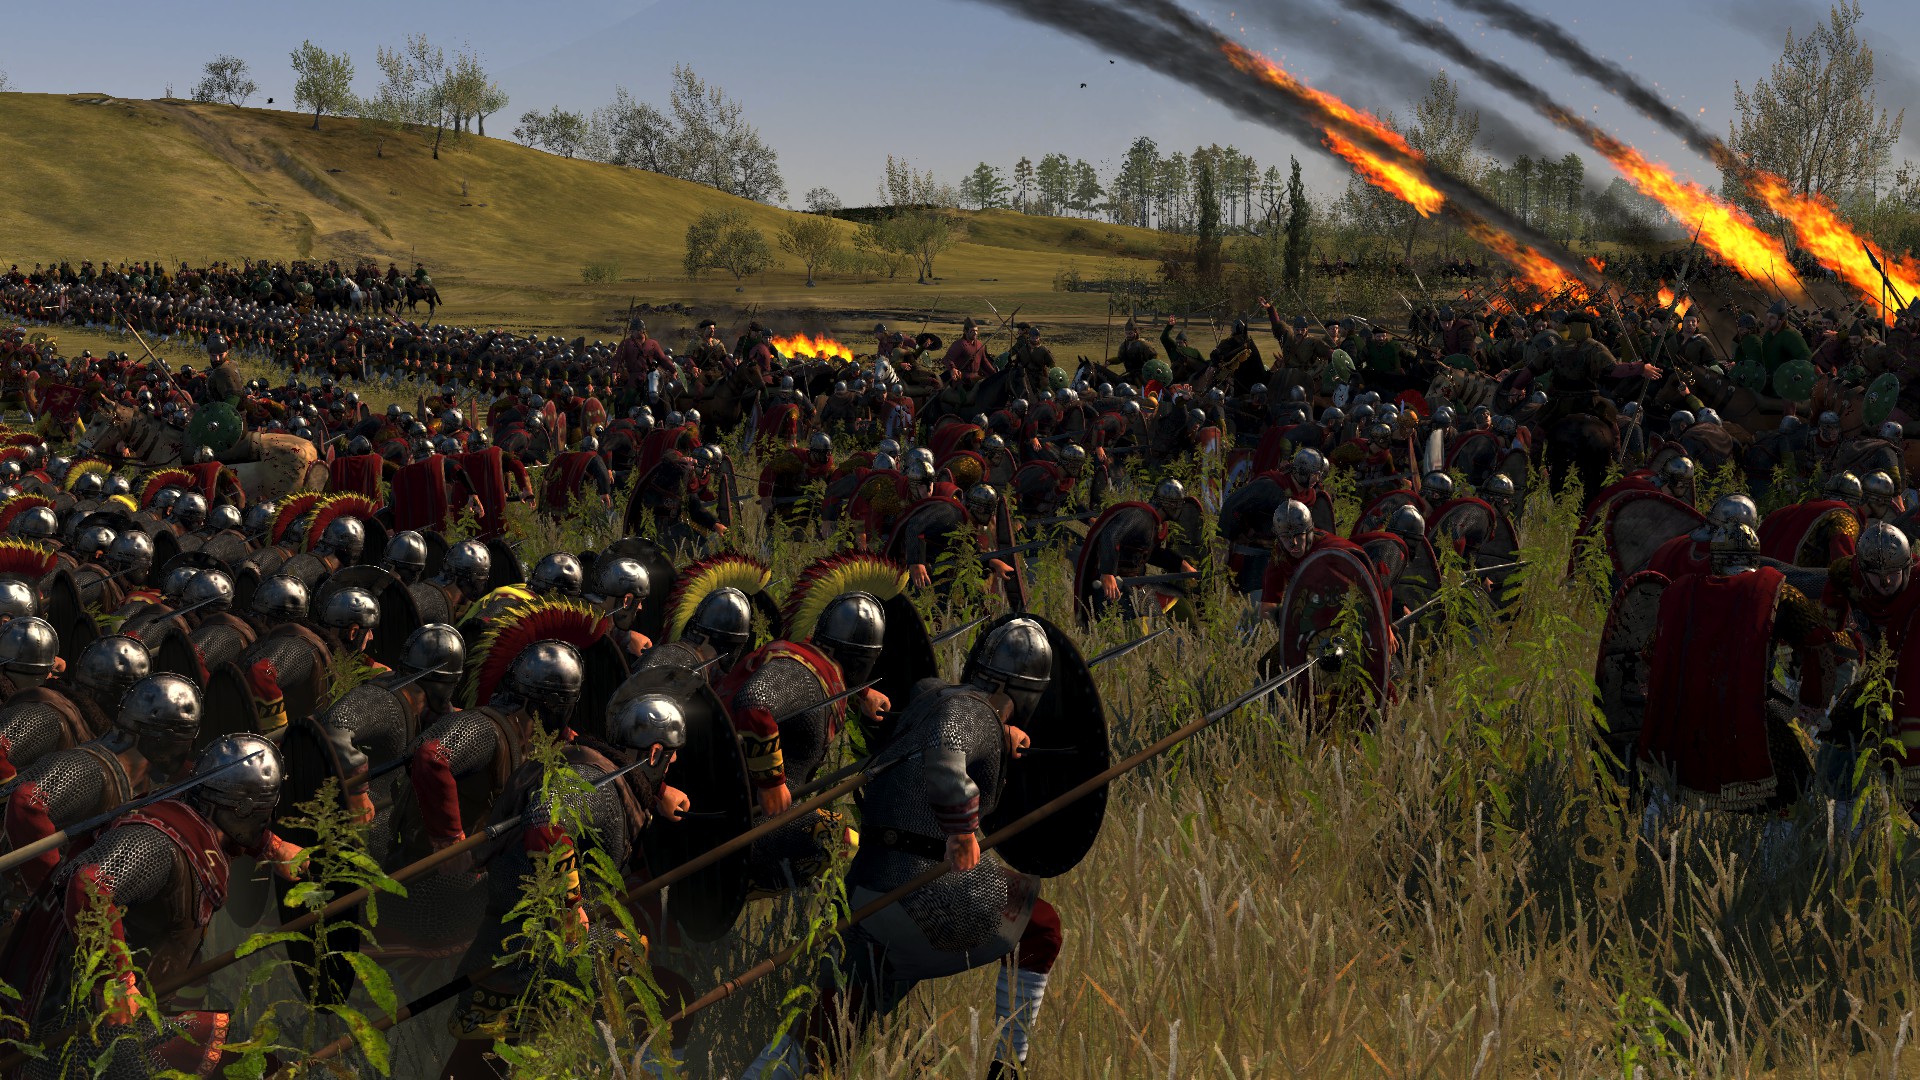 agrez all in one mod for total war attila, image 15, image, screenshots, sc...